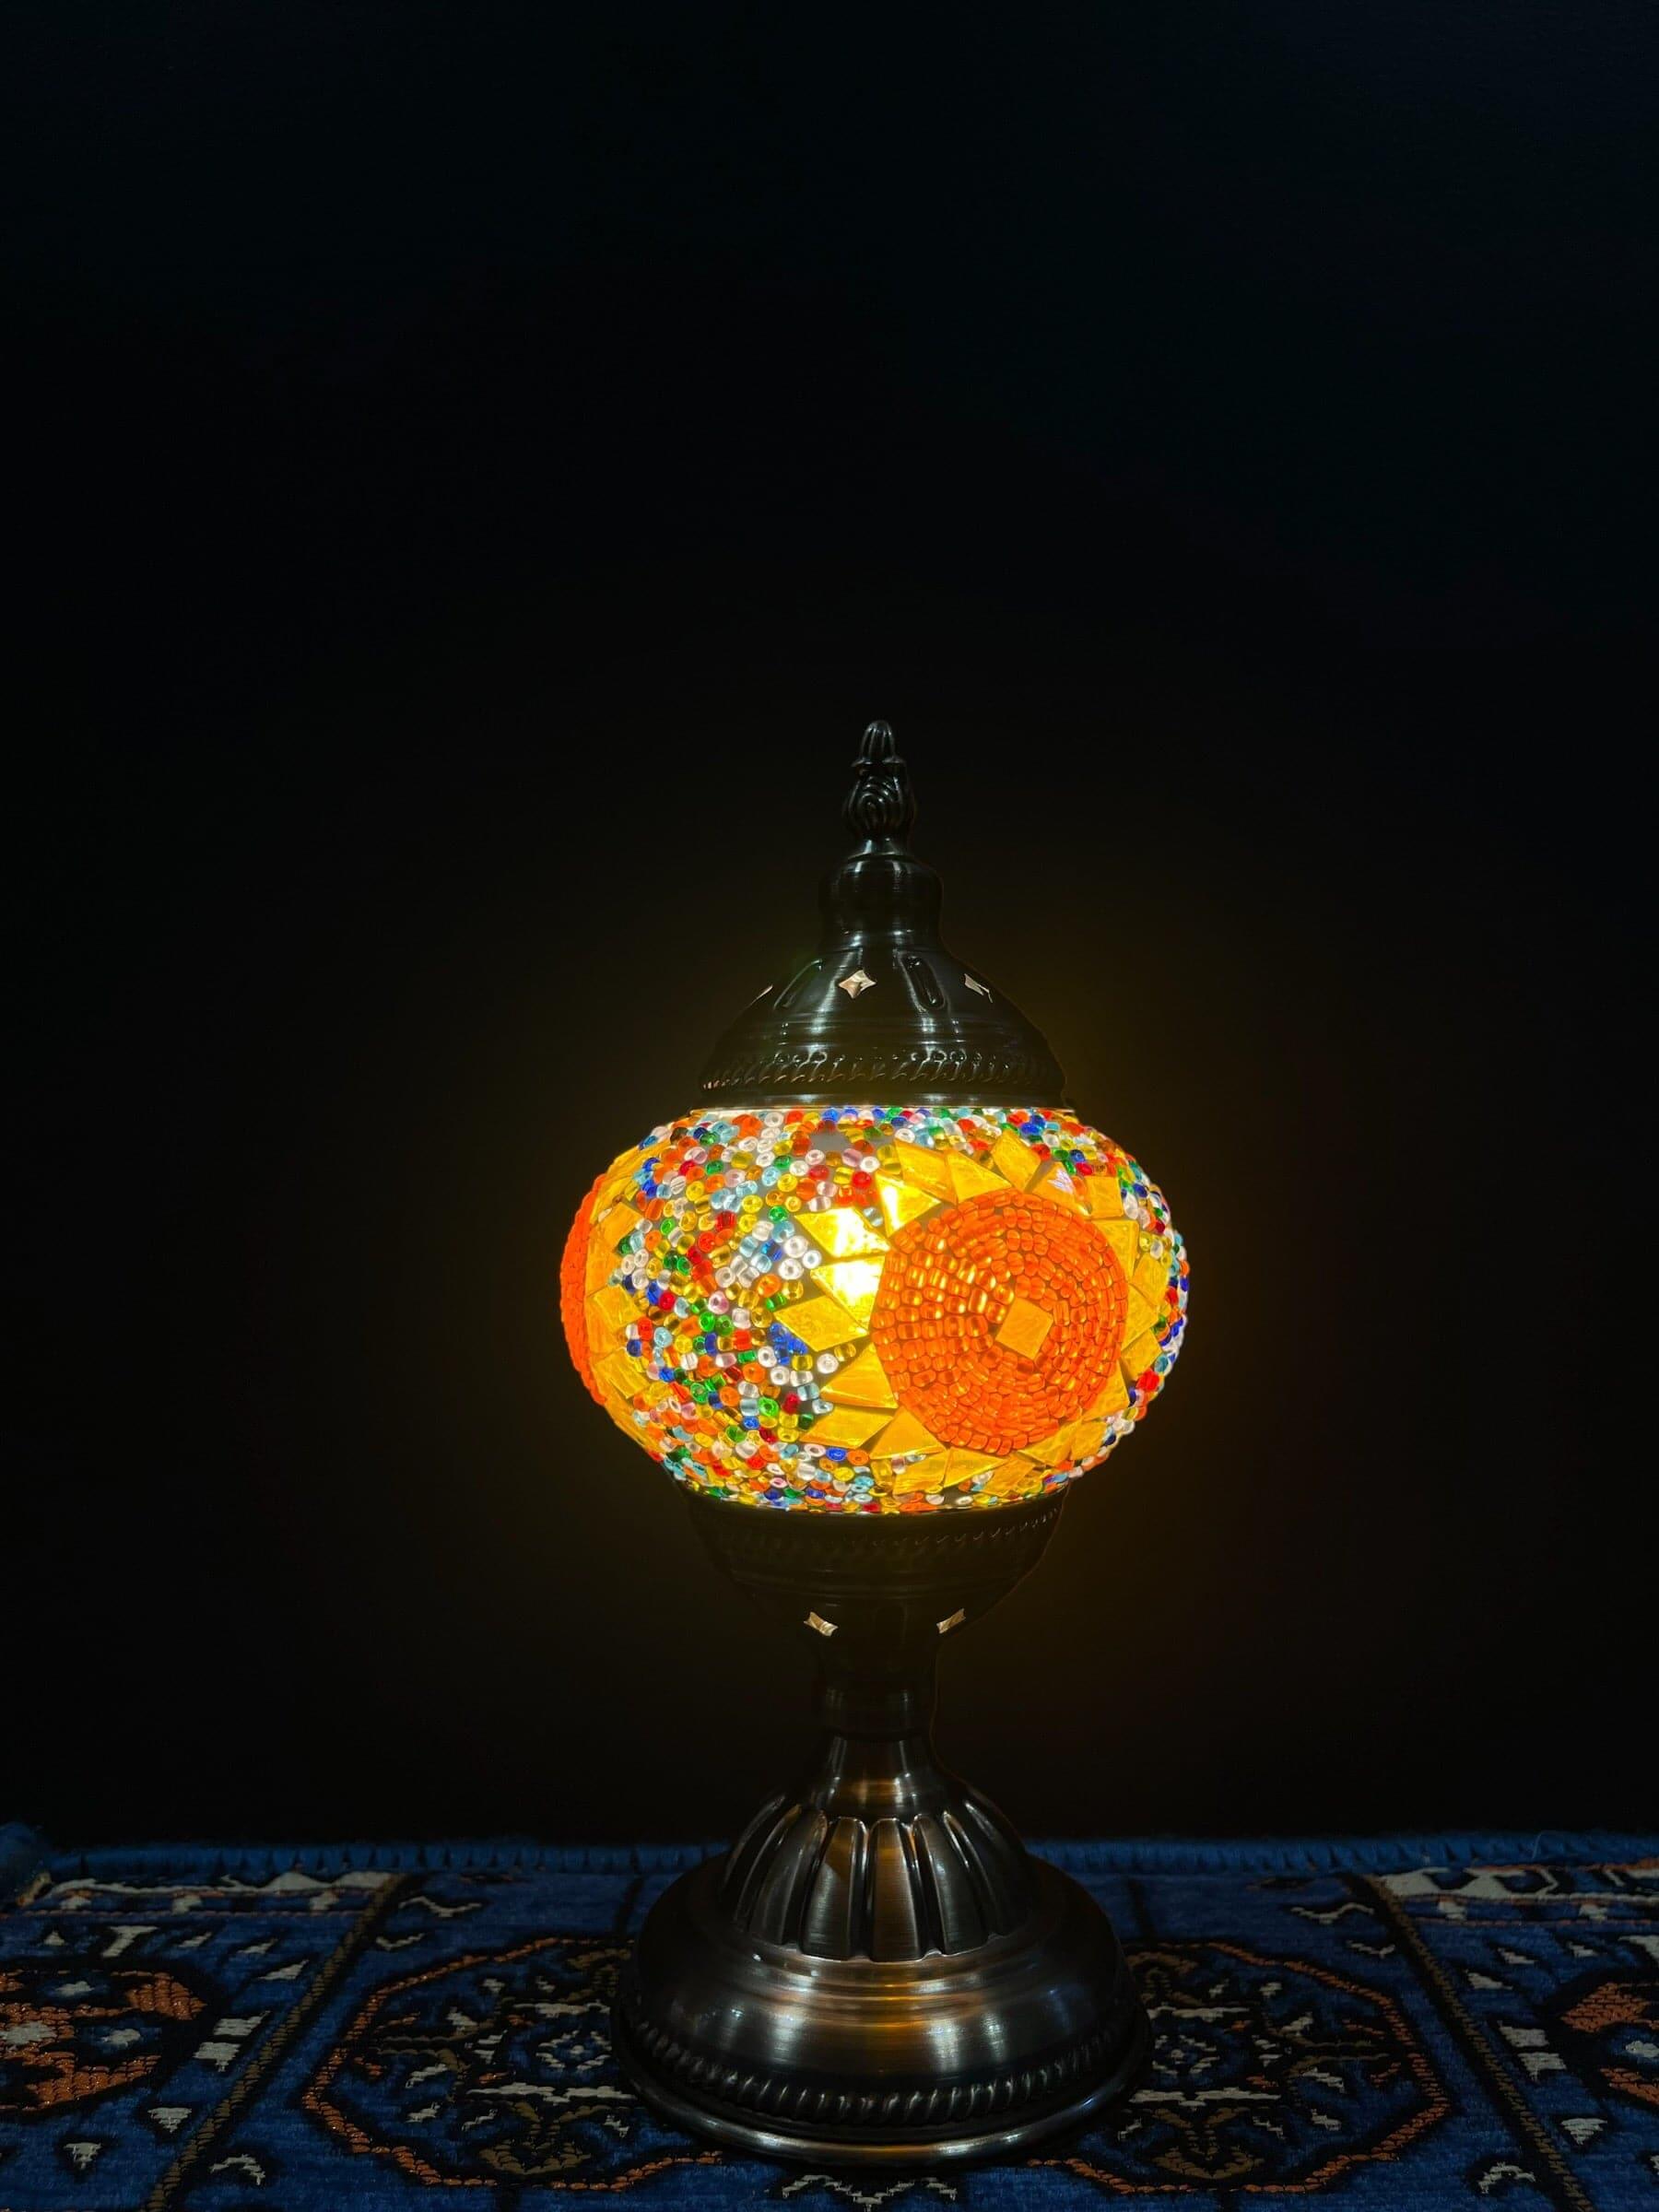 Mosaic Lamps: Unique and elegant decorative lighting fixtures featuring mosaic designs crafted from vibrant glass pieces. Add a touch of grace and charm to your space with these exquisite lamps, suitable for various settings. Explore our mosaic lamp colle